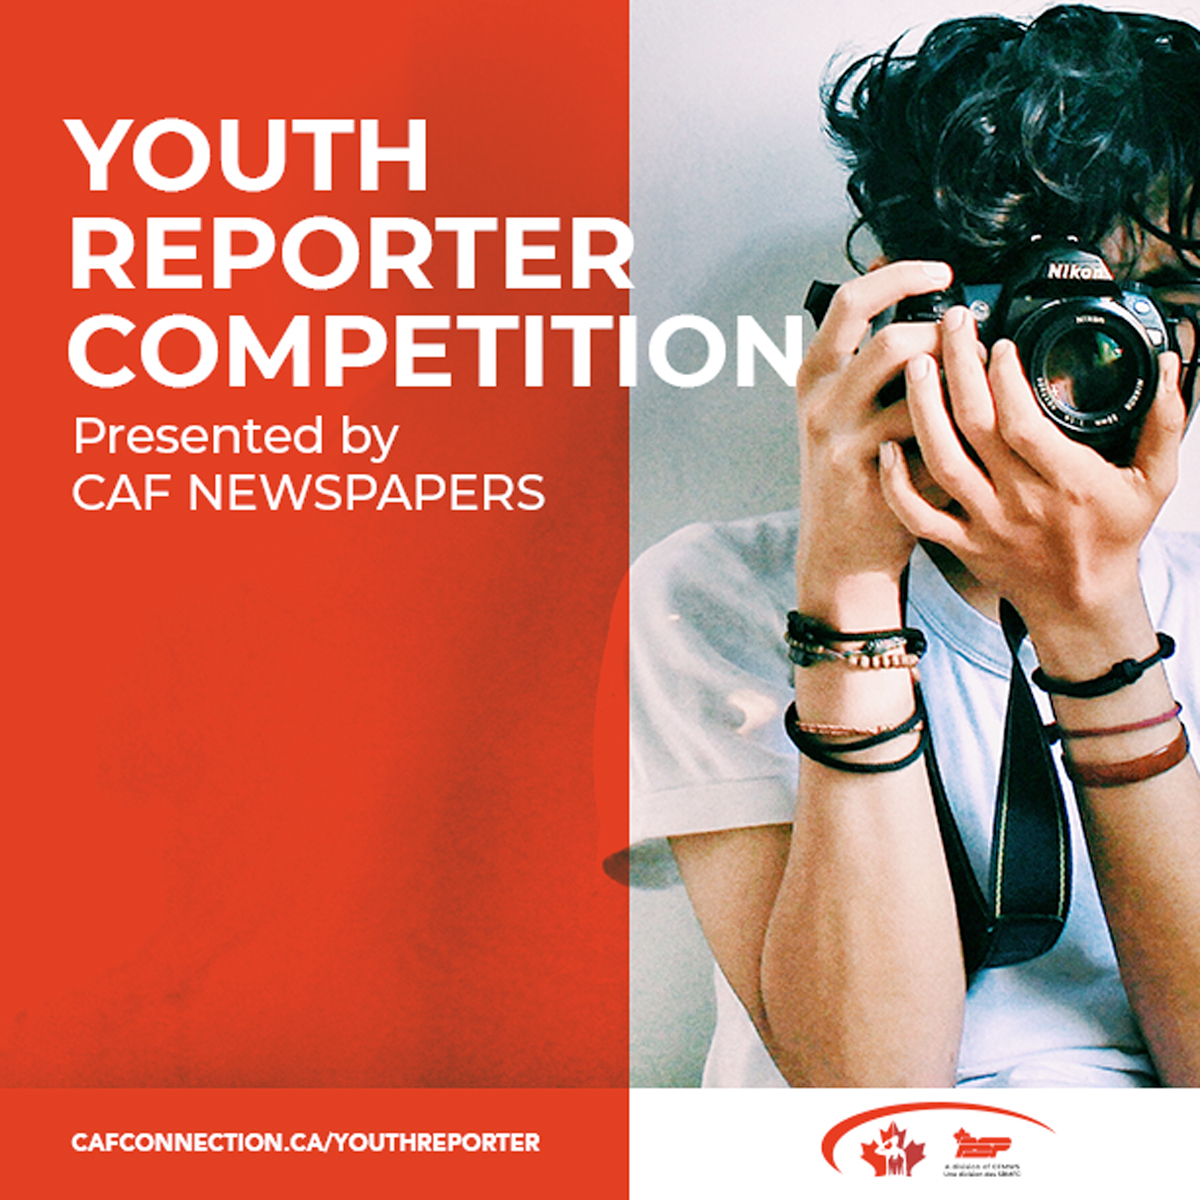 Youth Reporter Competition